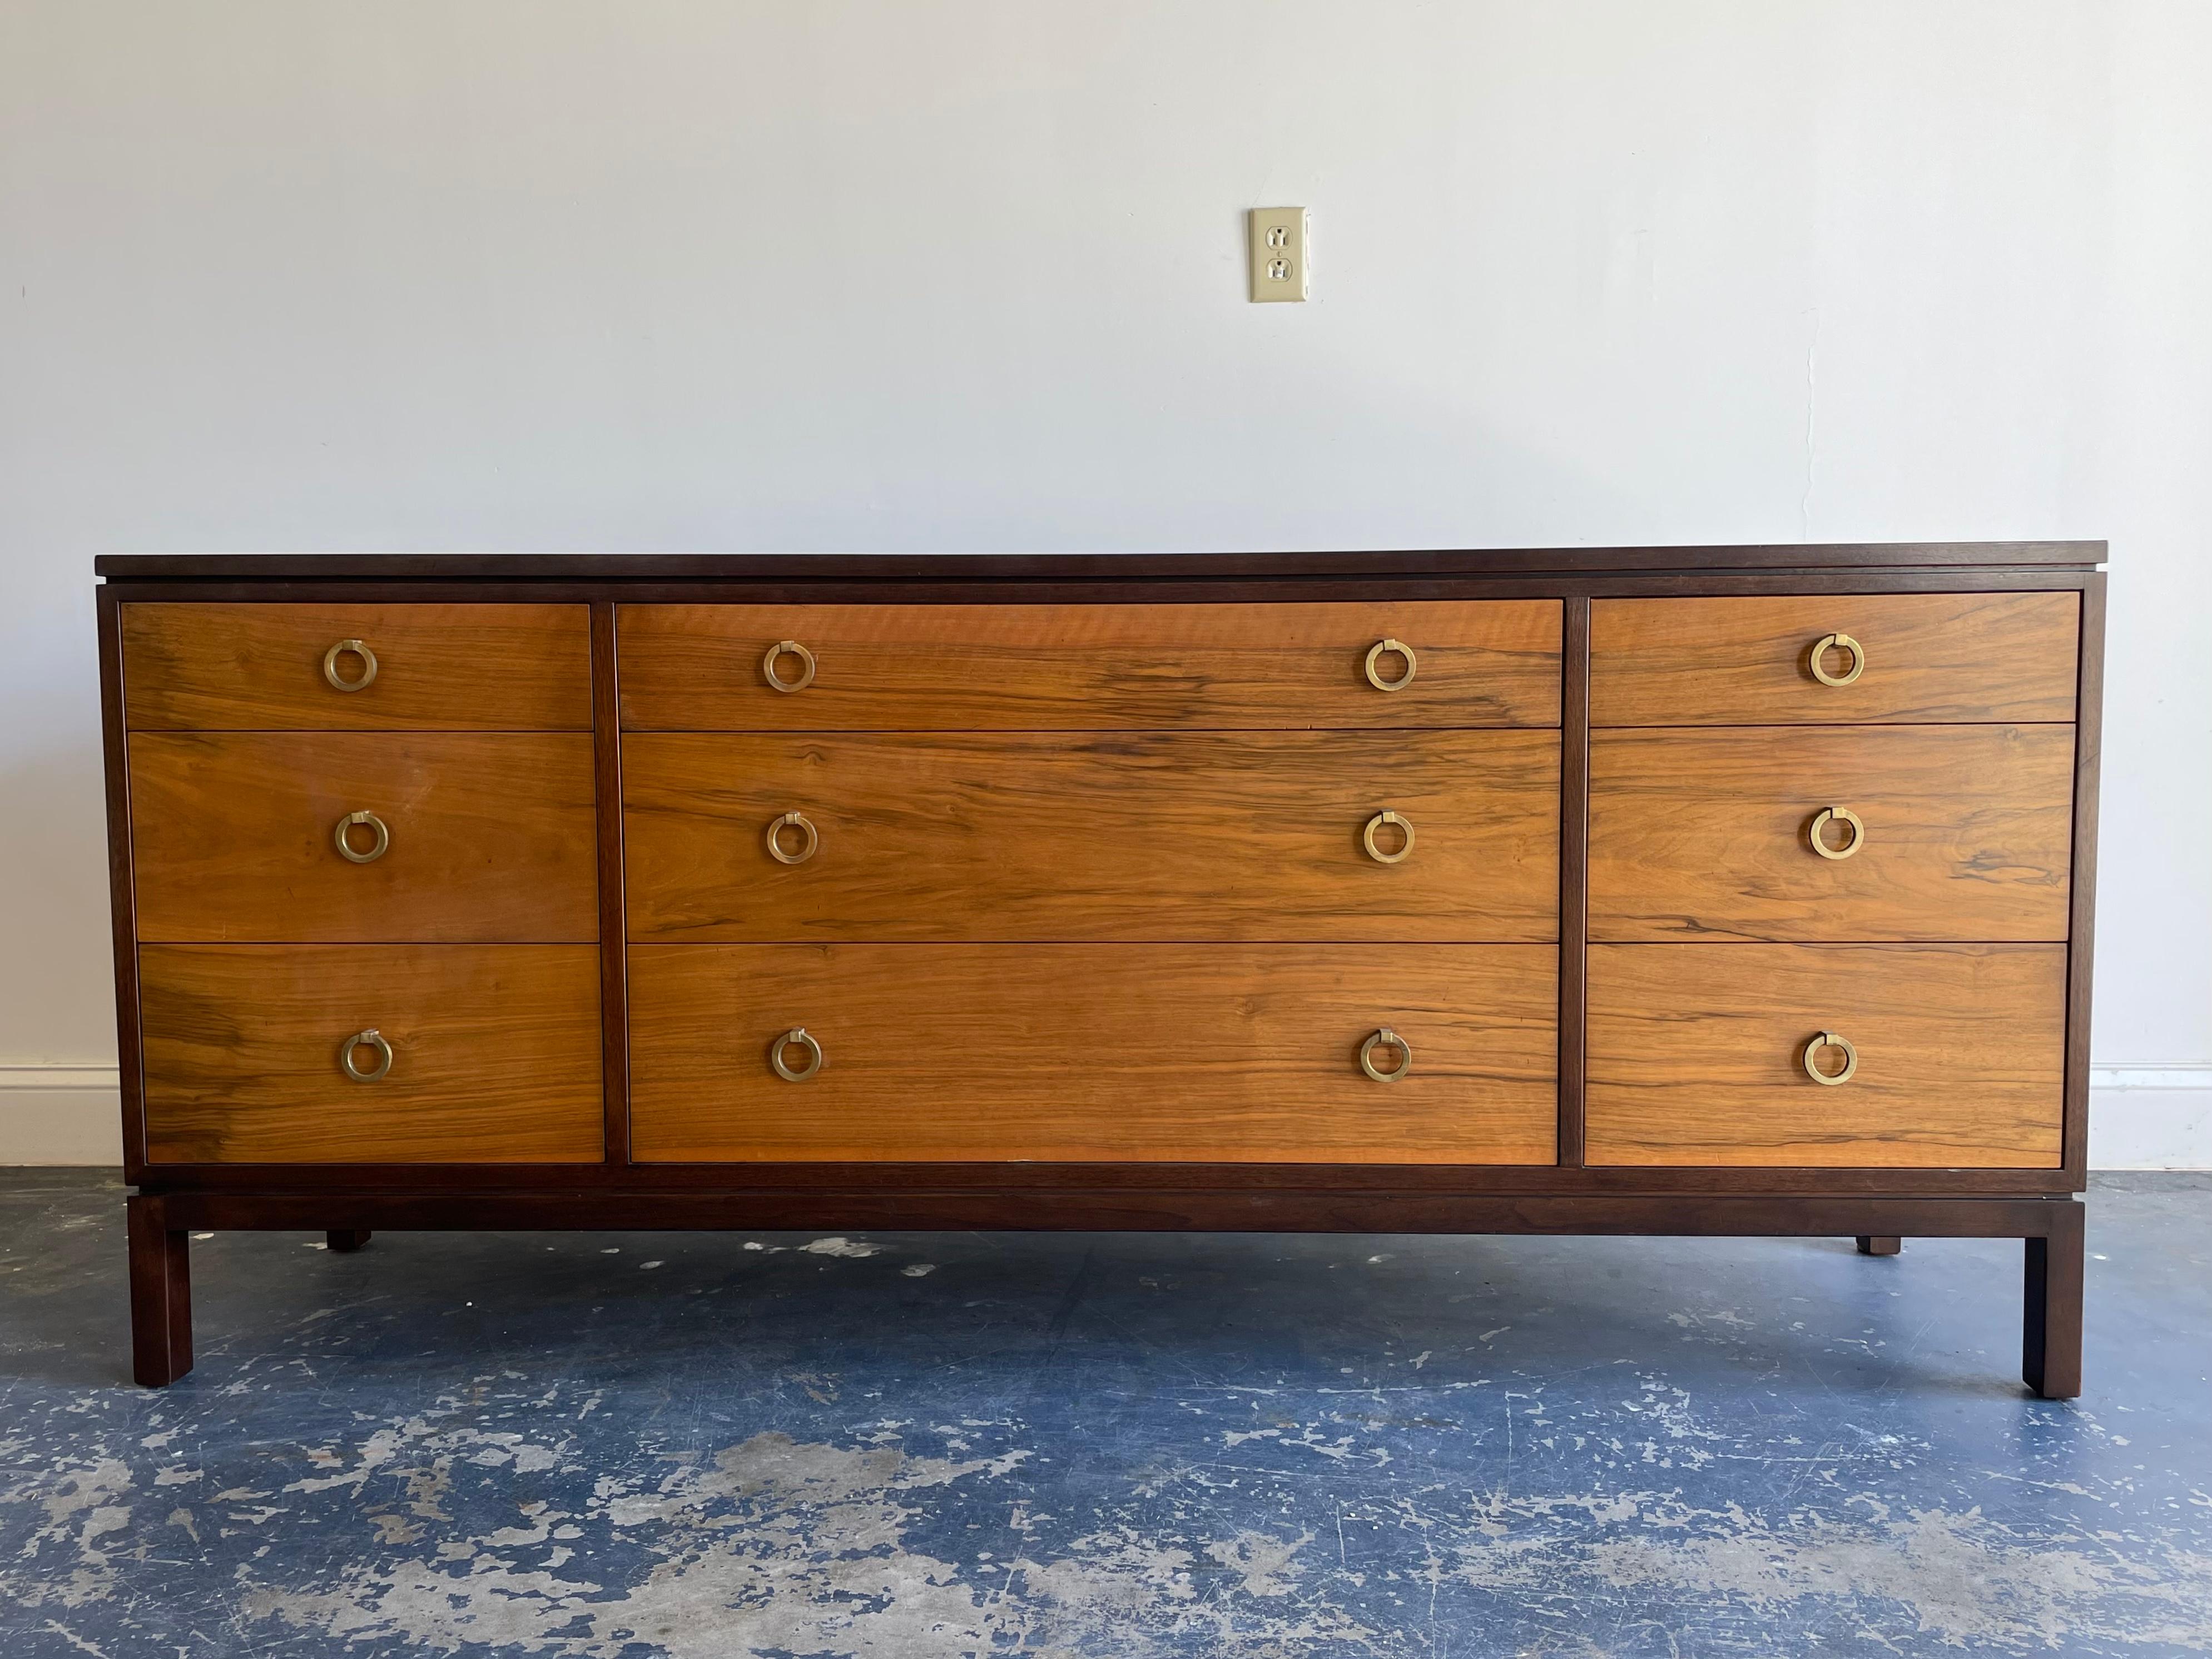 Elegant long dresser by Edward Wormley for Dunbar. Features graduating drawers with 6 smaller drawers and three long drawers in the middle. Brass ring pulls highlight piece. 

Please message for video to accurately depict condition of top as